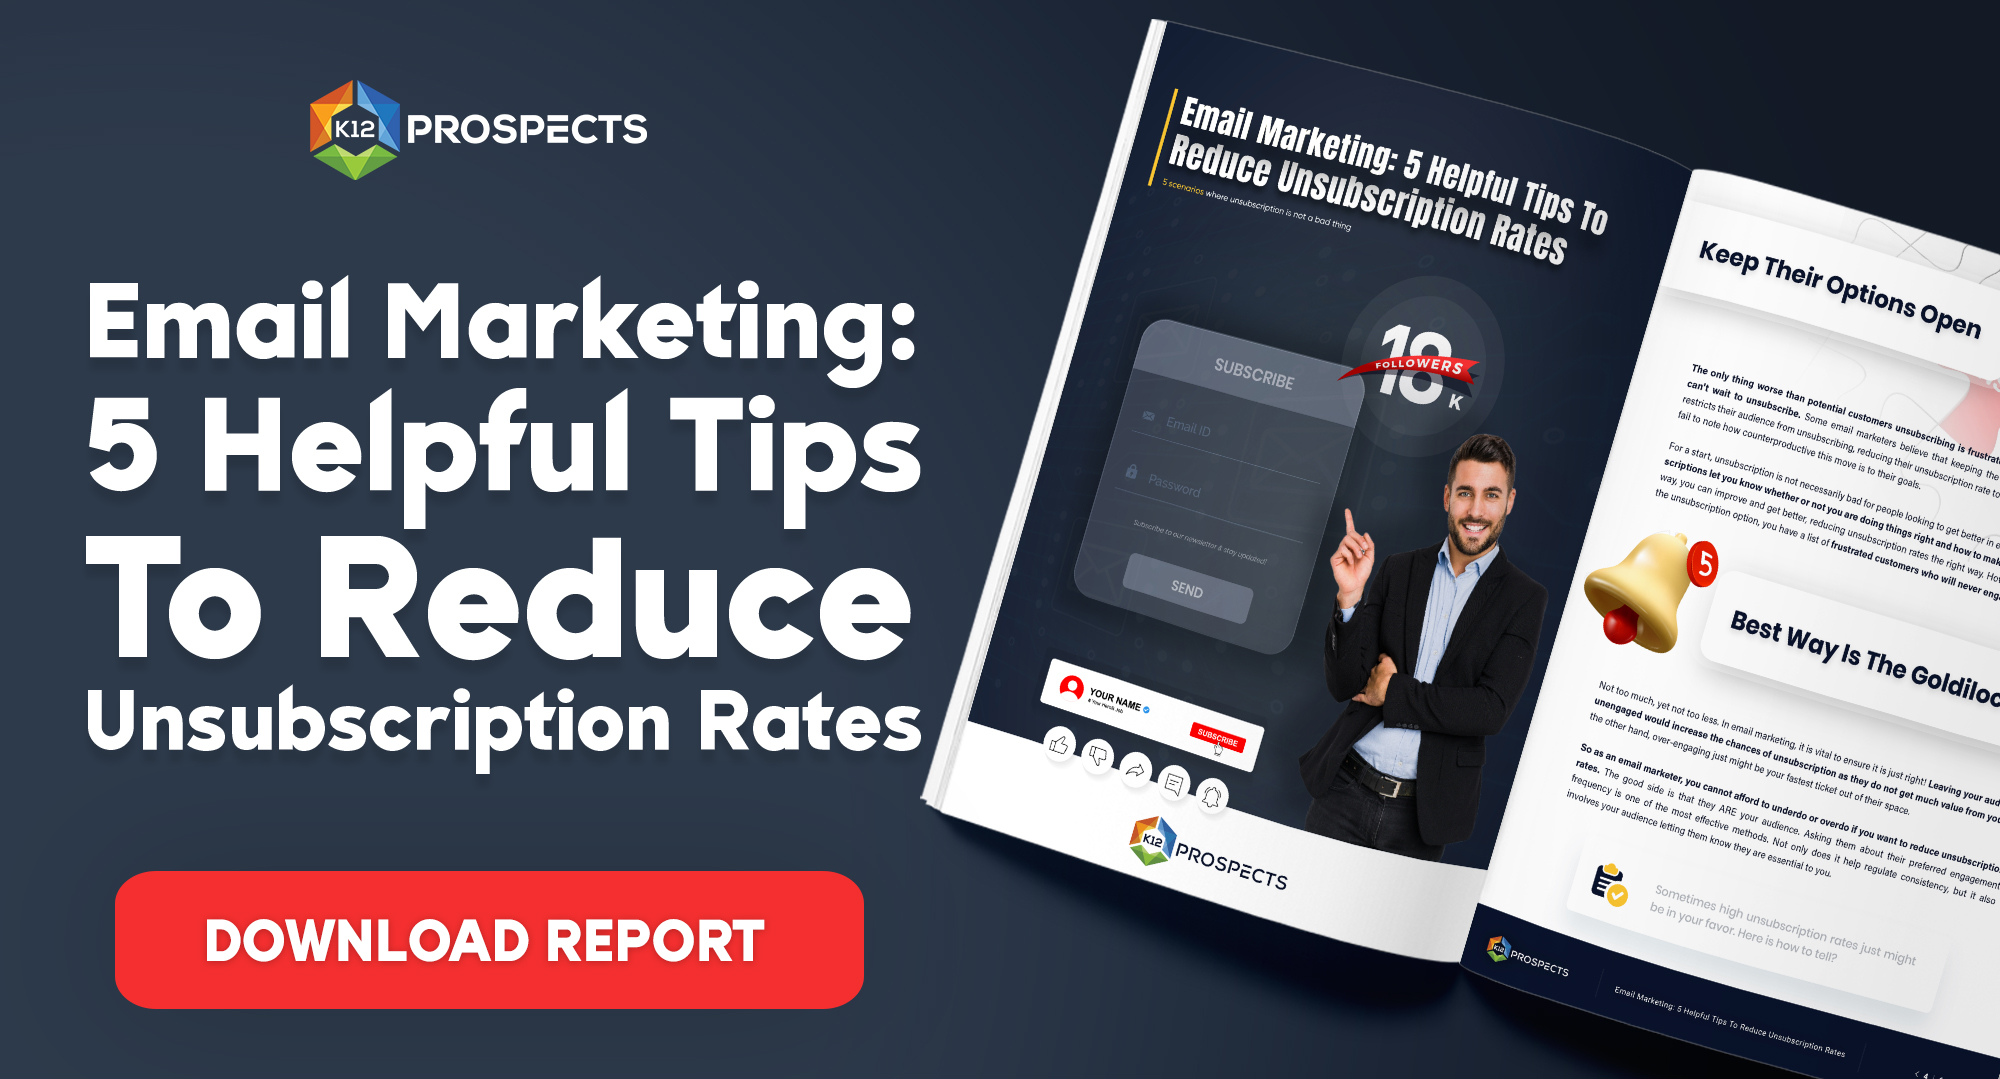 CTA Email Marketing 5 Helpful Tips To Reduce Unsubscription Rates